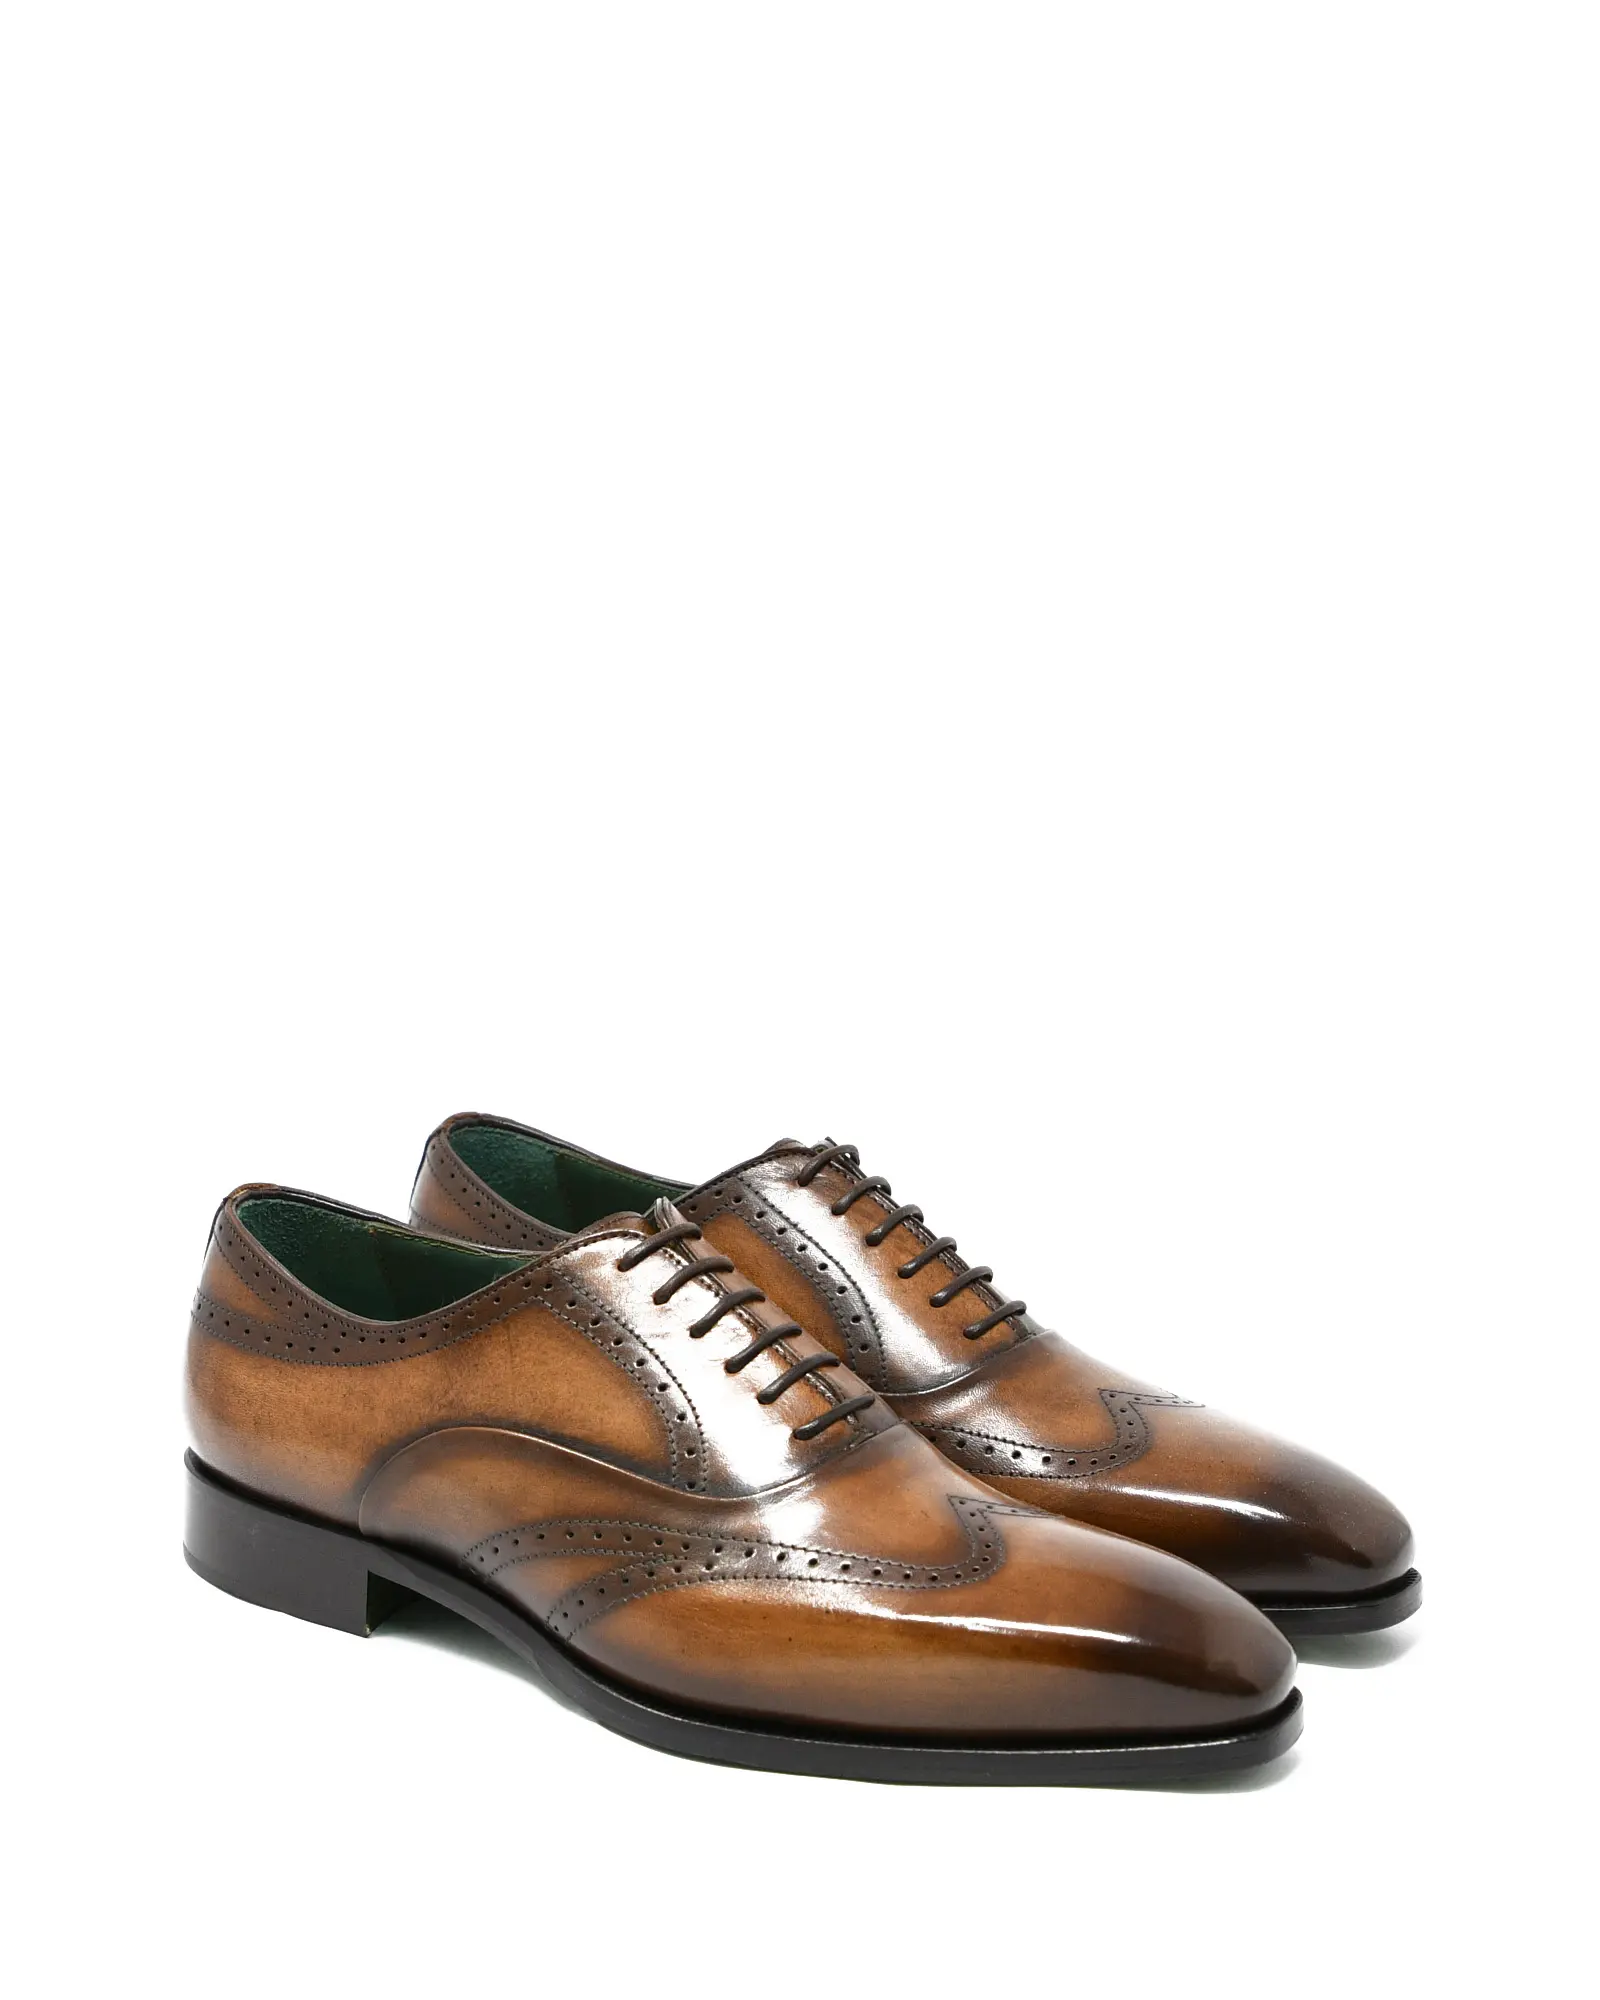 BROUGE SHOES to be used for formal occasion The production is 100% Made in Italy coloured by hand